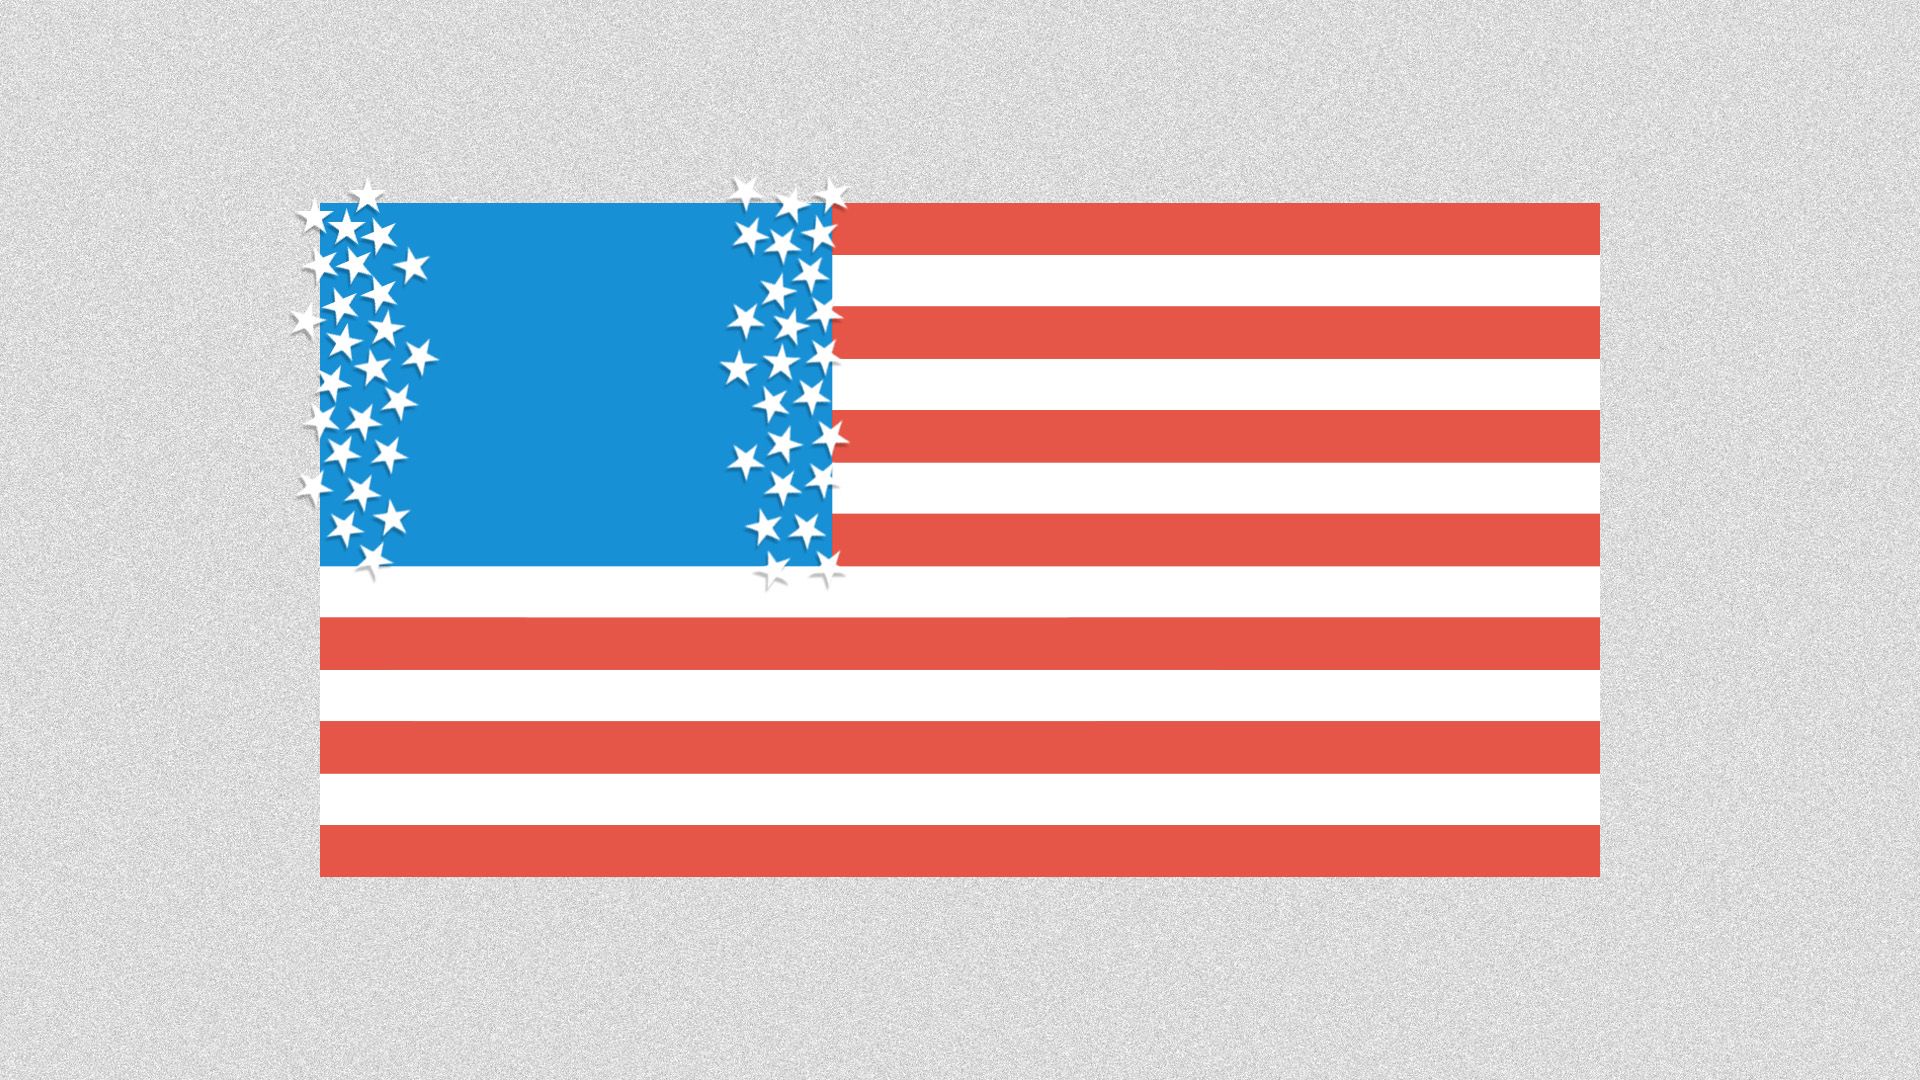 Illustration of American flag with parted stars